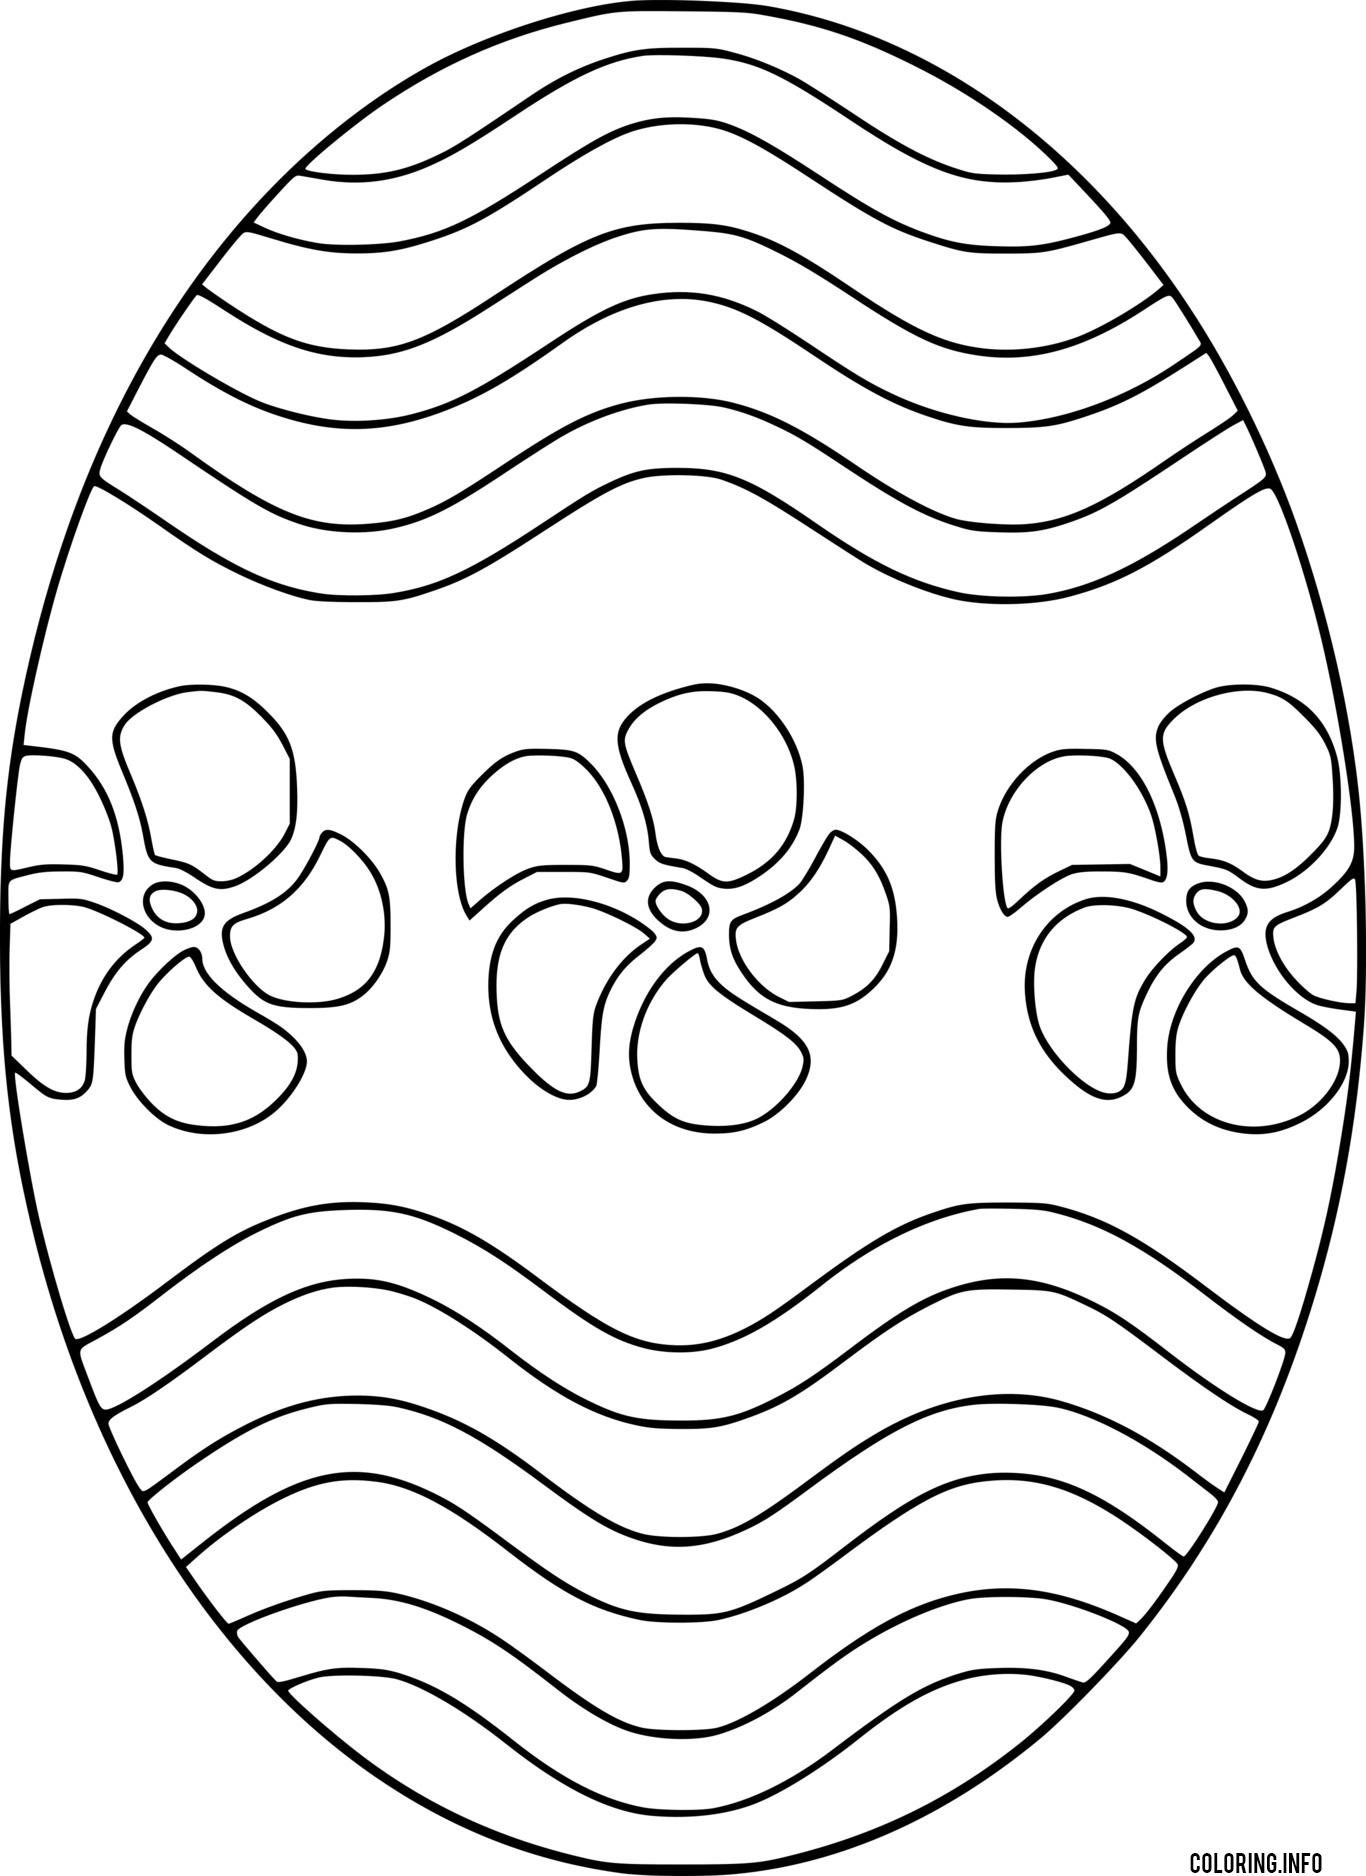 Easter Egg With Fun Patterns coloring